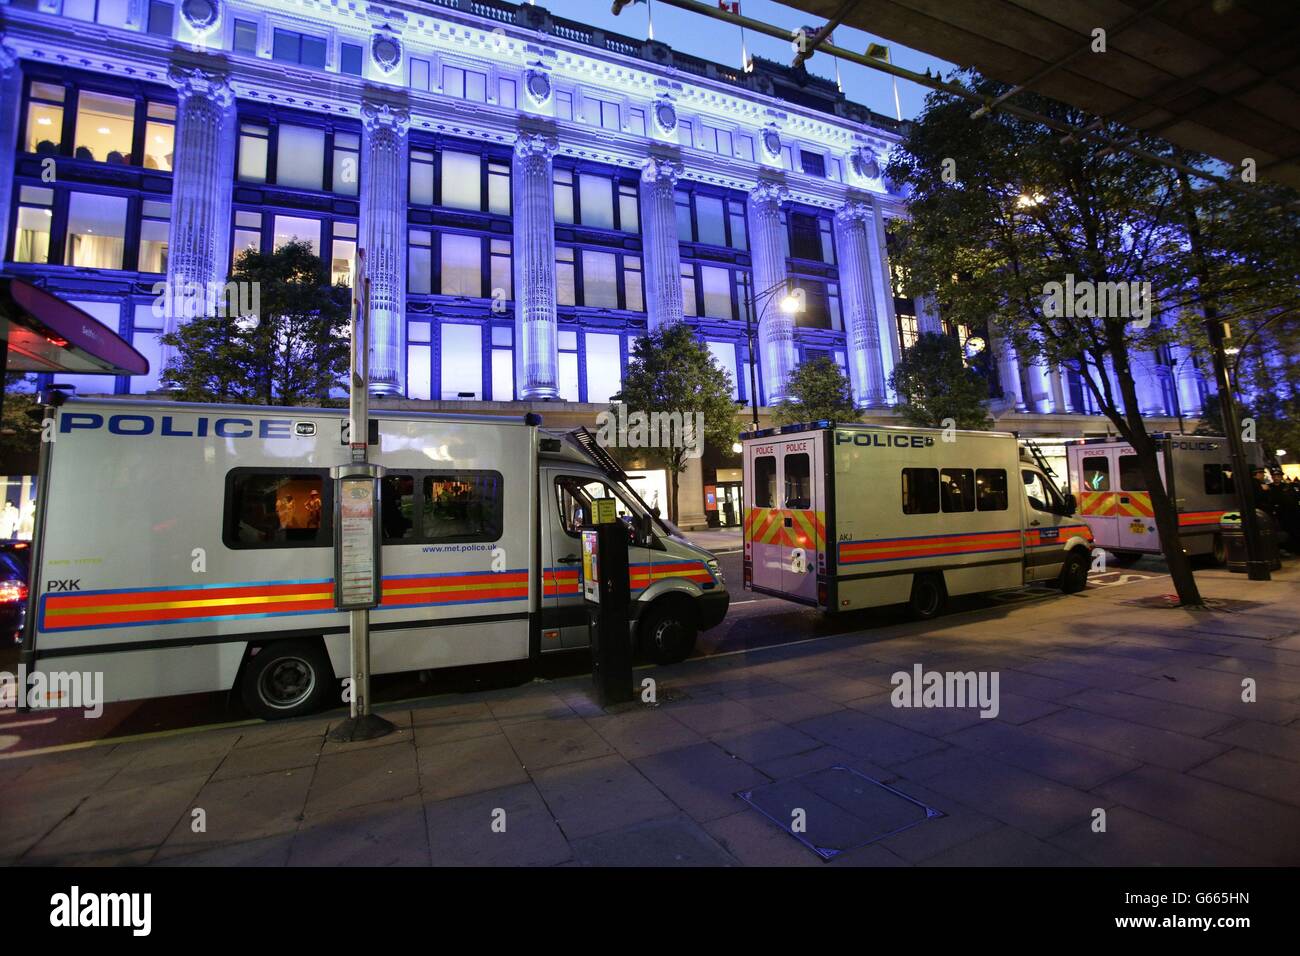 Police vans at the scene of a smash and grab robbery in Selfridges, Oxford Street, London. Stock Photo